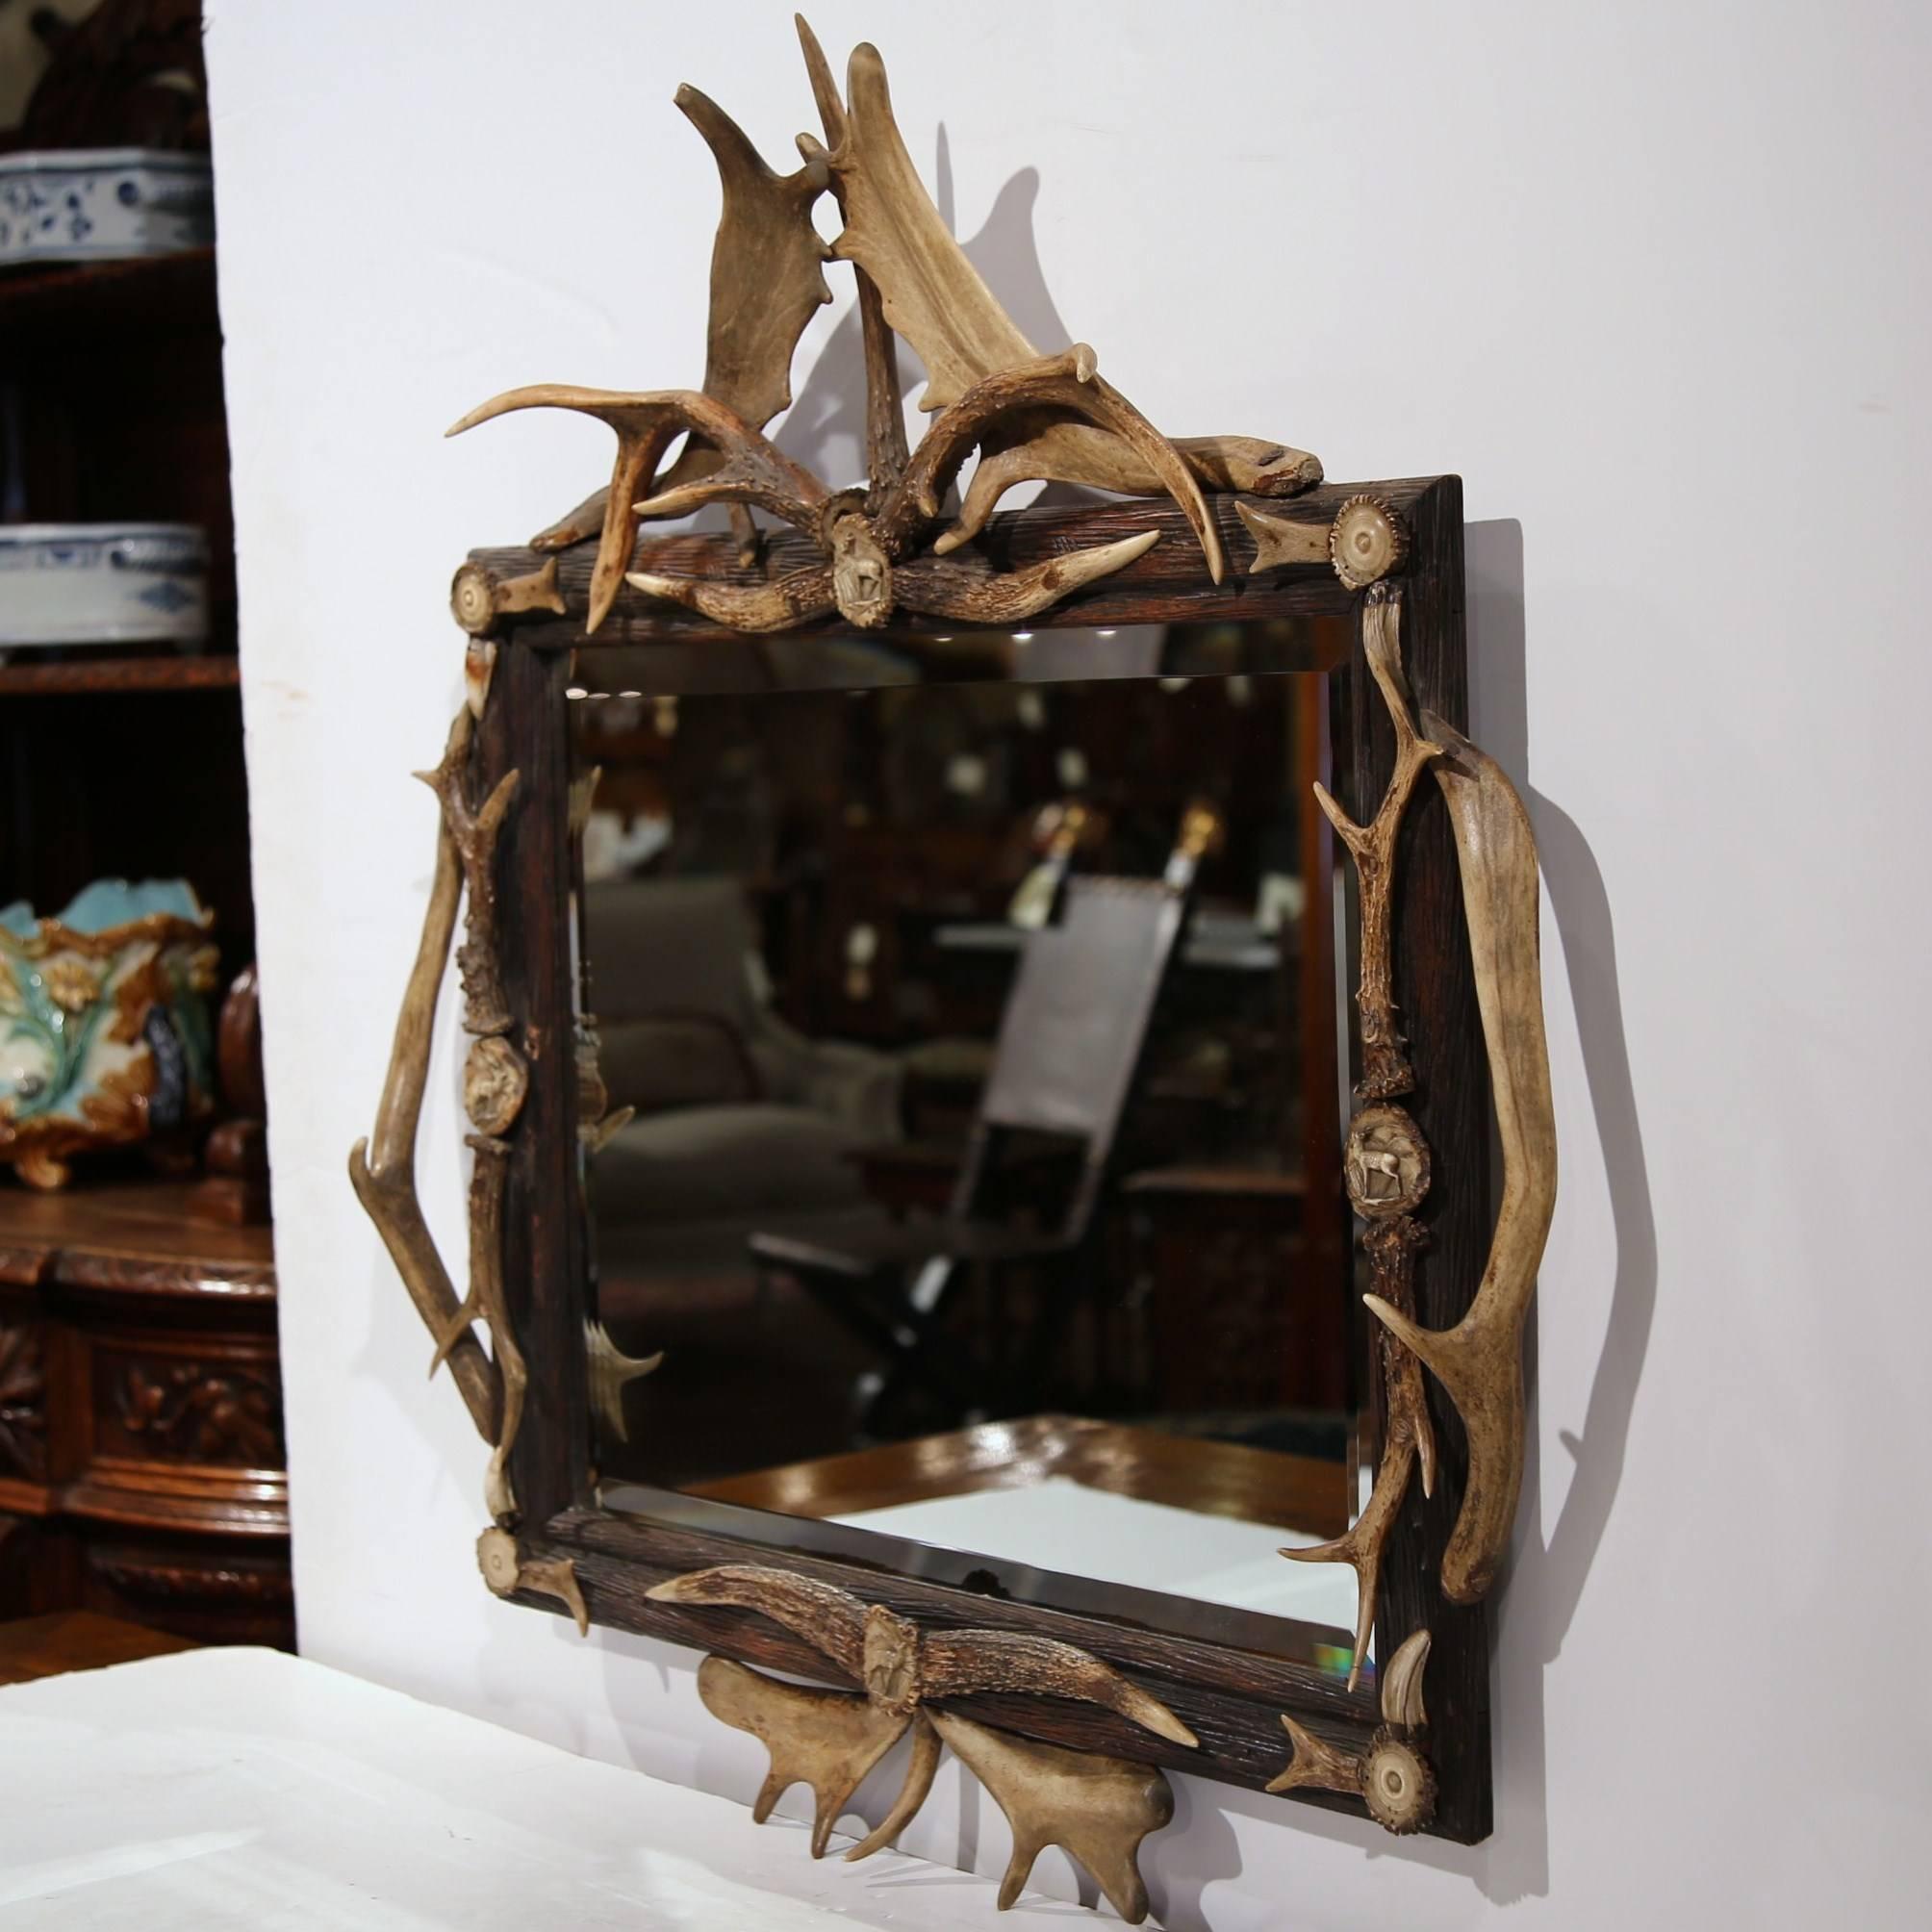 Swiss 19th Century Black Forest Mirror with Antlers and Carved Deer Medallions